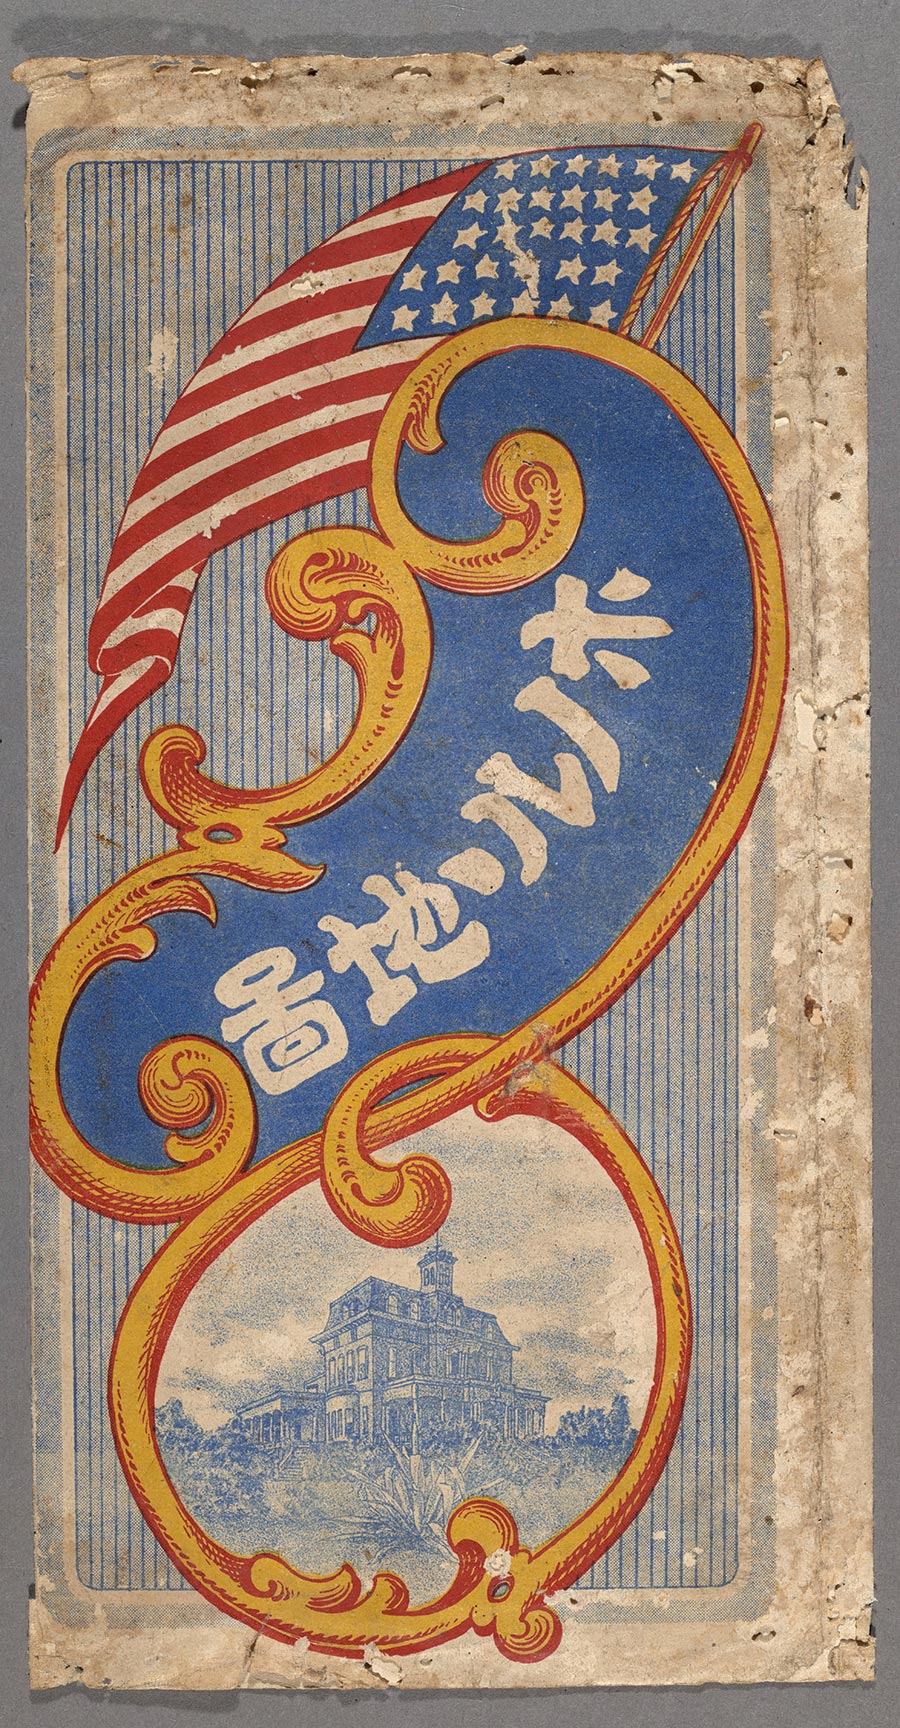 Cover of Honolulu map with Japanese writing.